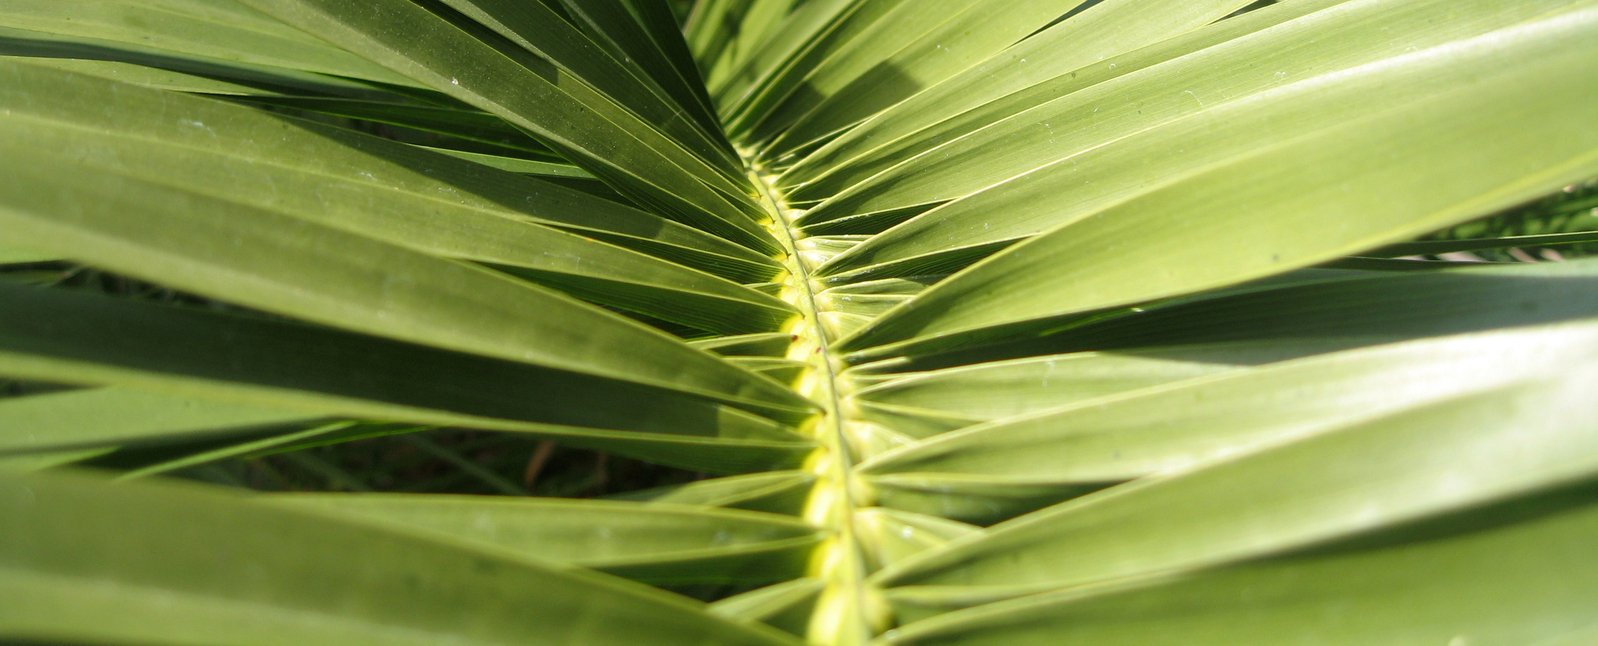 the long leafy palm is very green